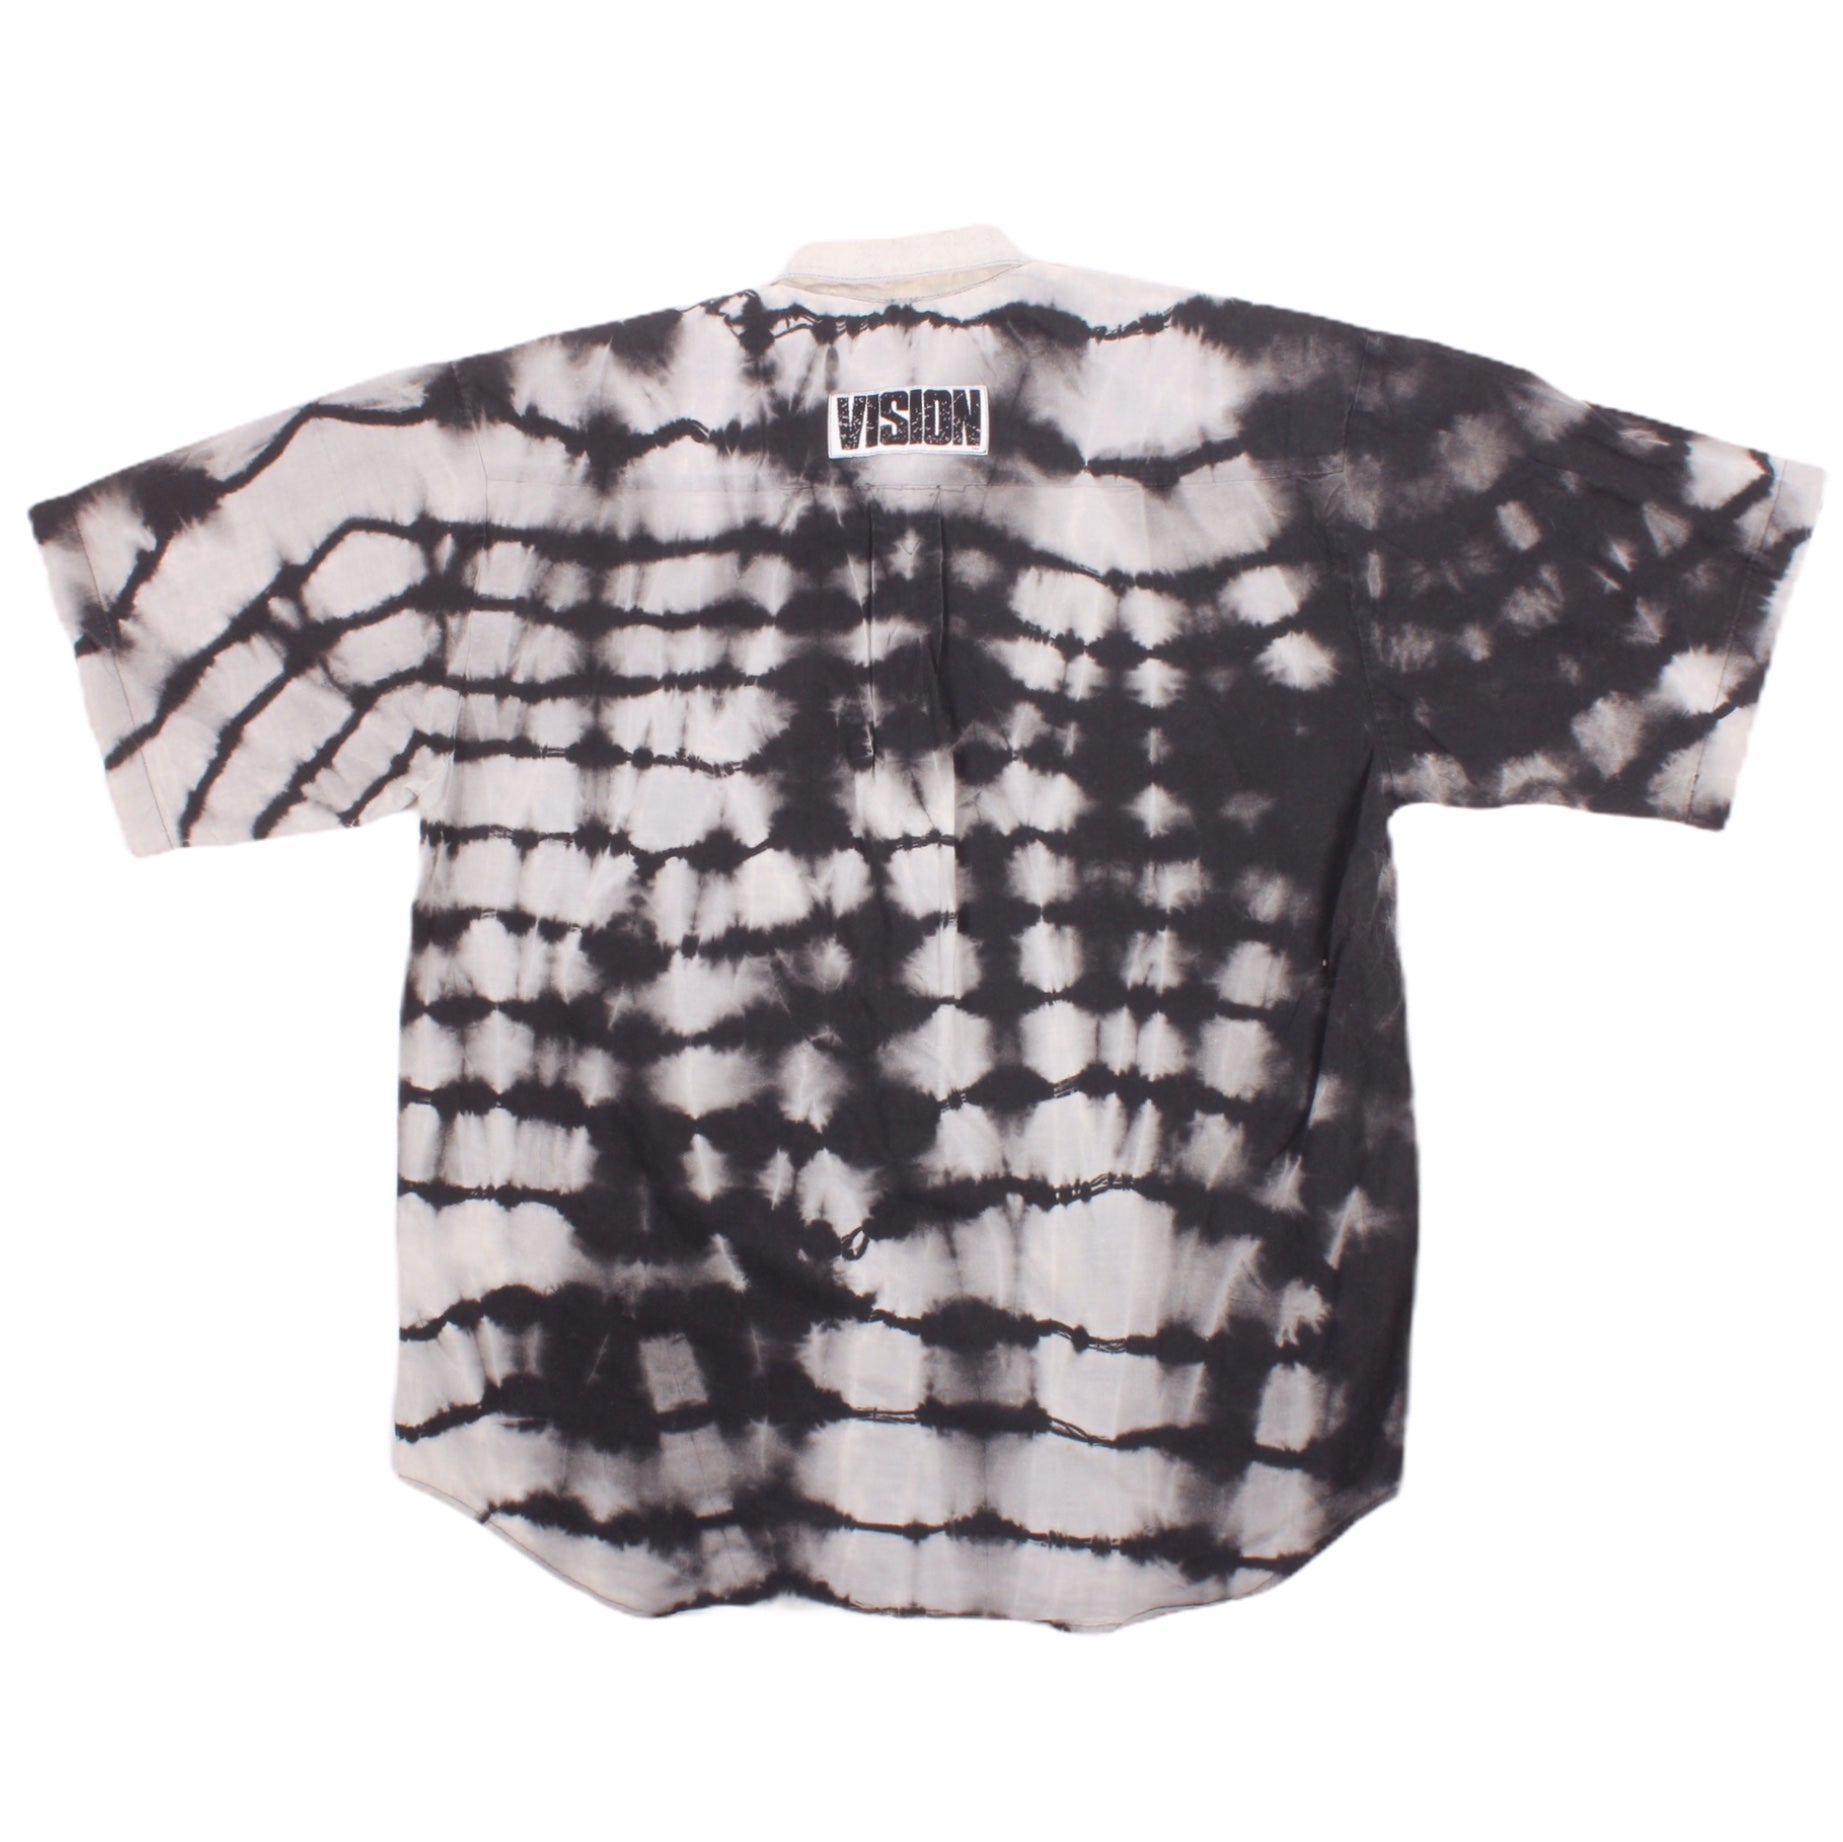 Overripe Vision Street Wear Button Up Black Acid Small (1990)